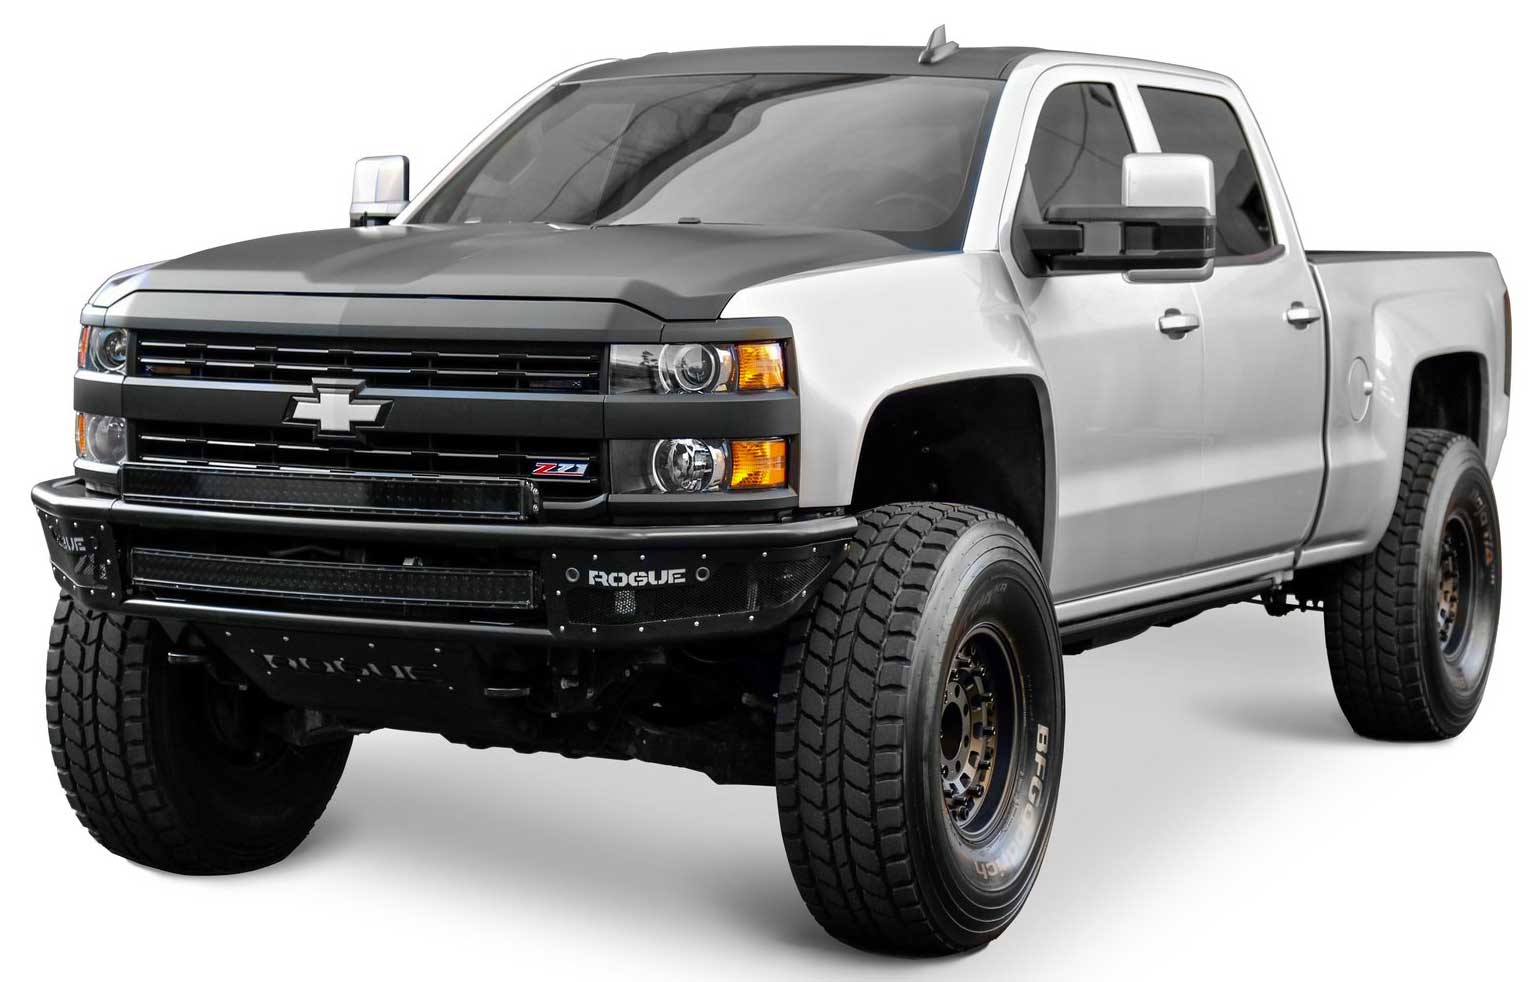 Recommended Transmission fluid - 2014-2018 Silverado & Sierra  Troubleshooting 